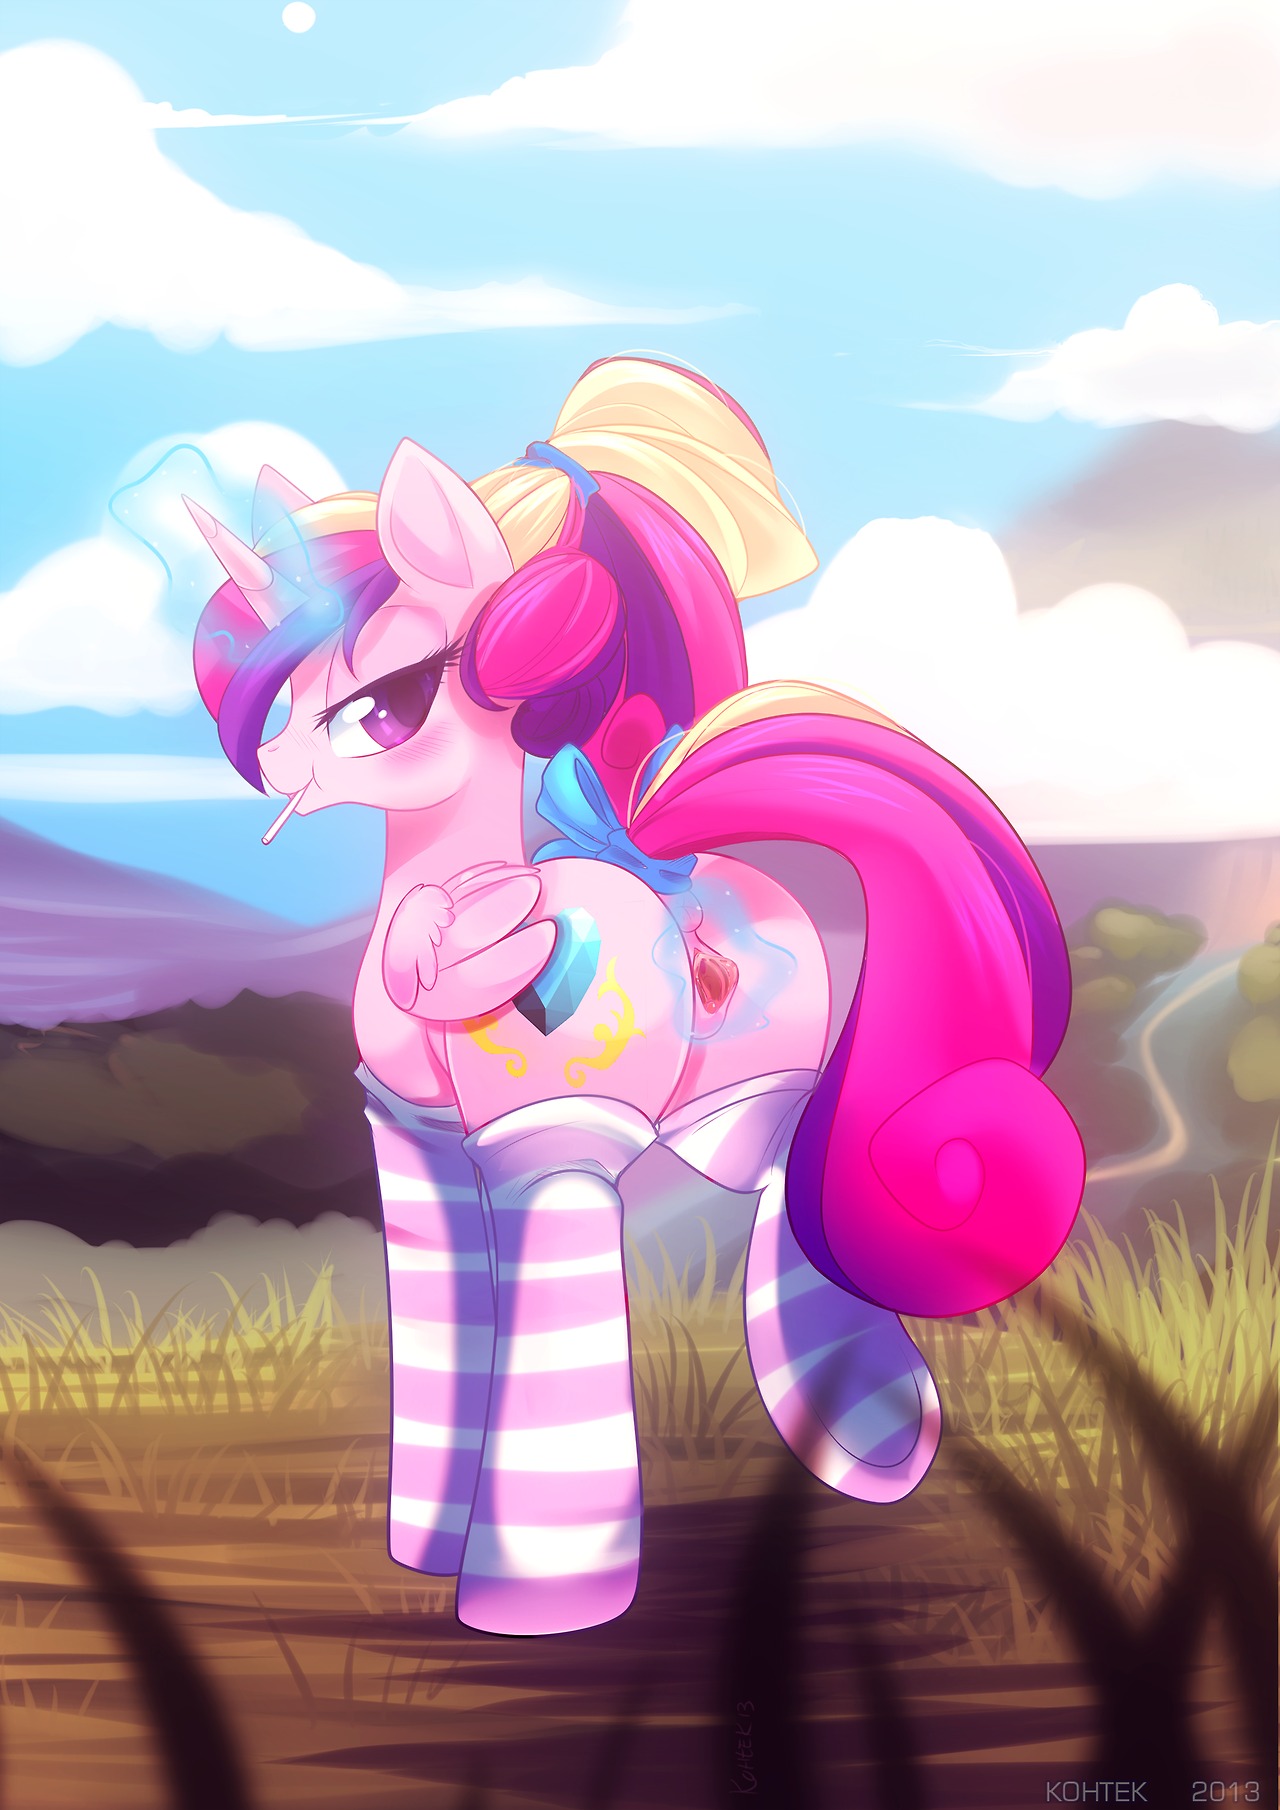 Pictures showing for Mlp Cadence Filly - www.mypornarchive.net